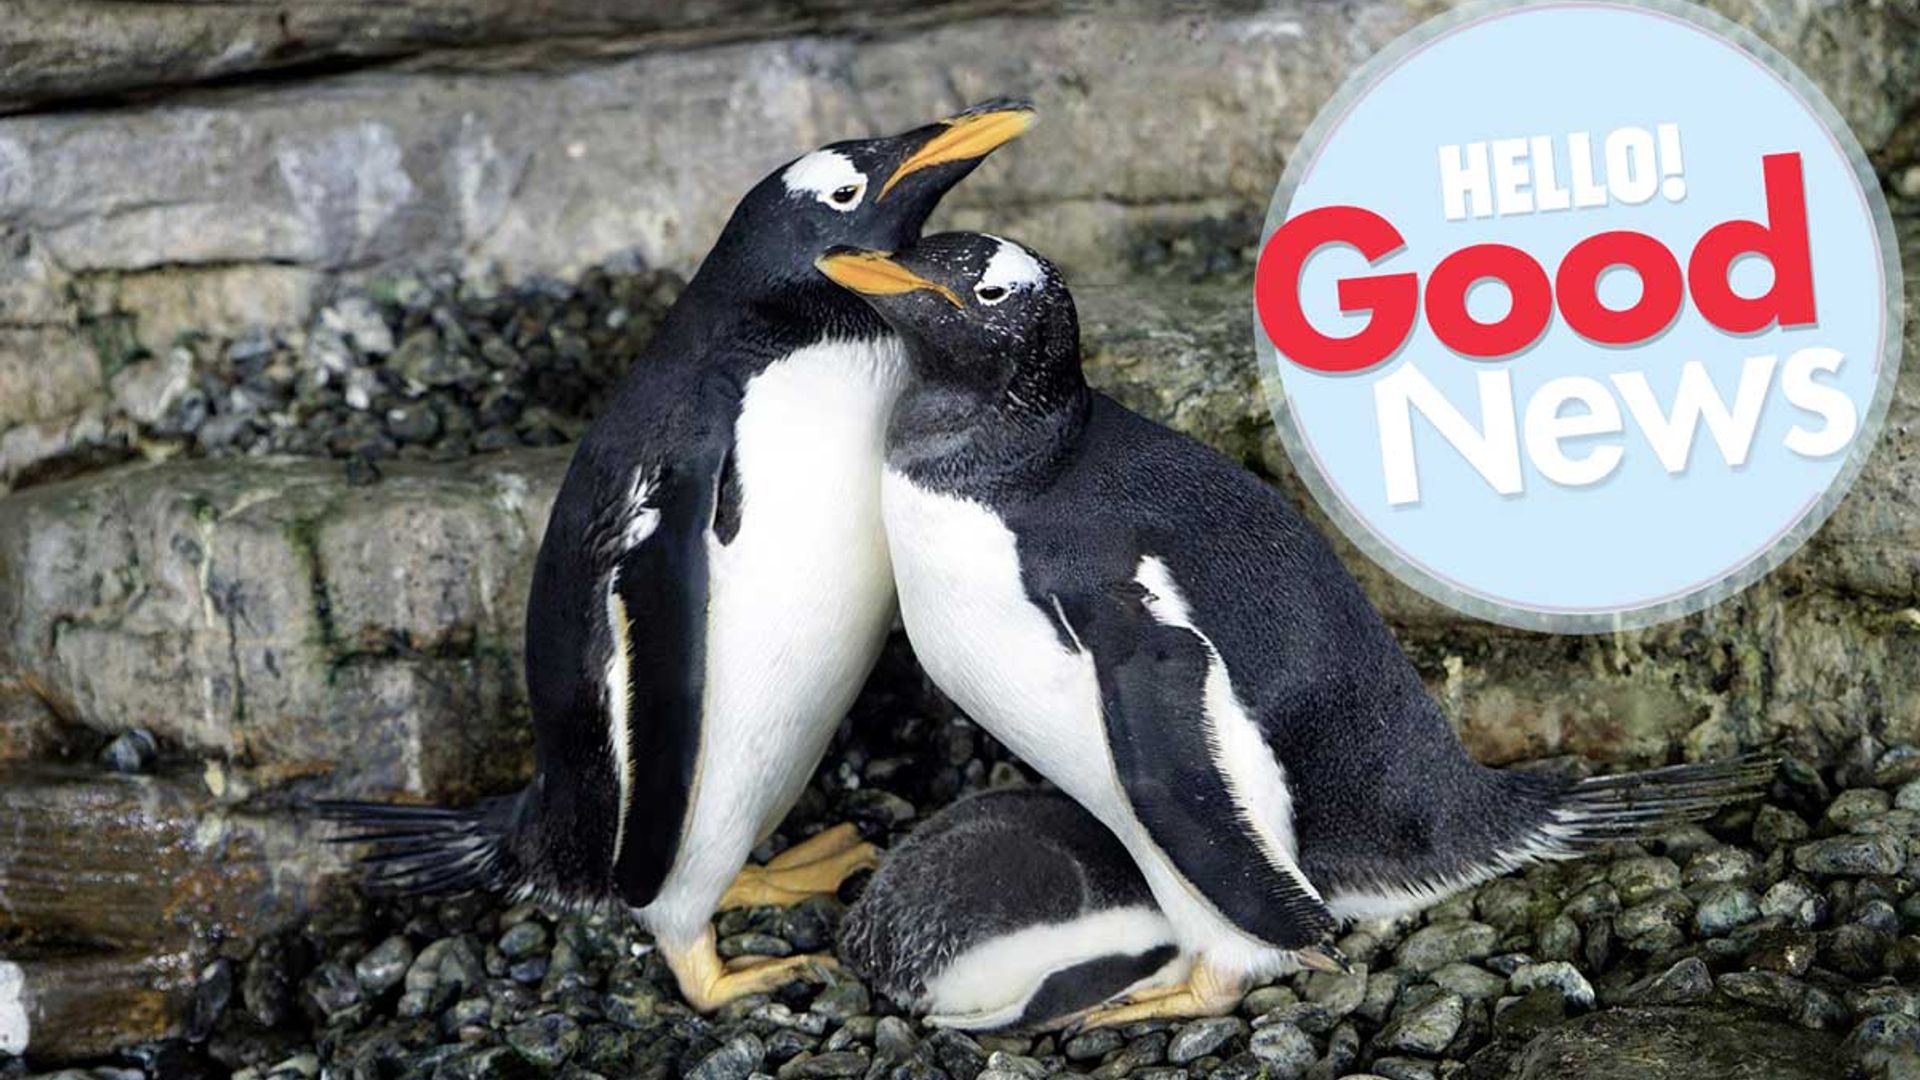 Female penguins become new mums after hatching a chick together